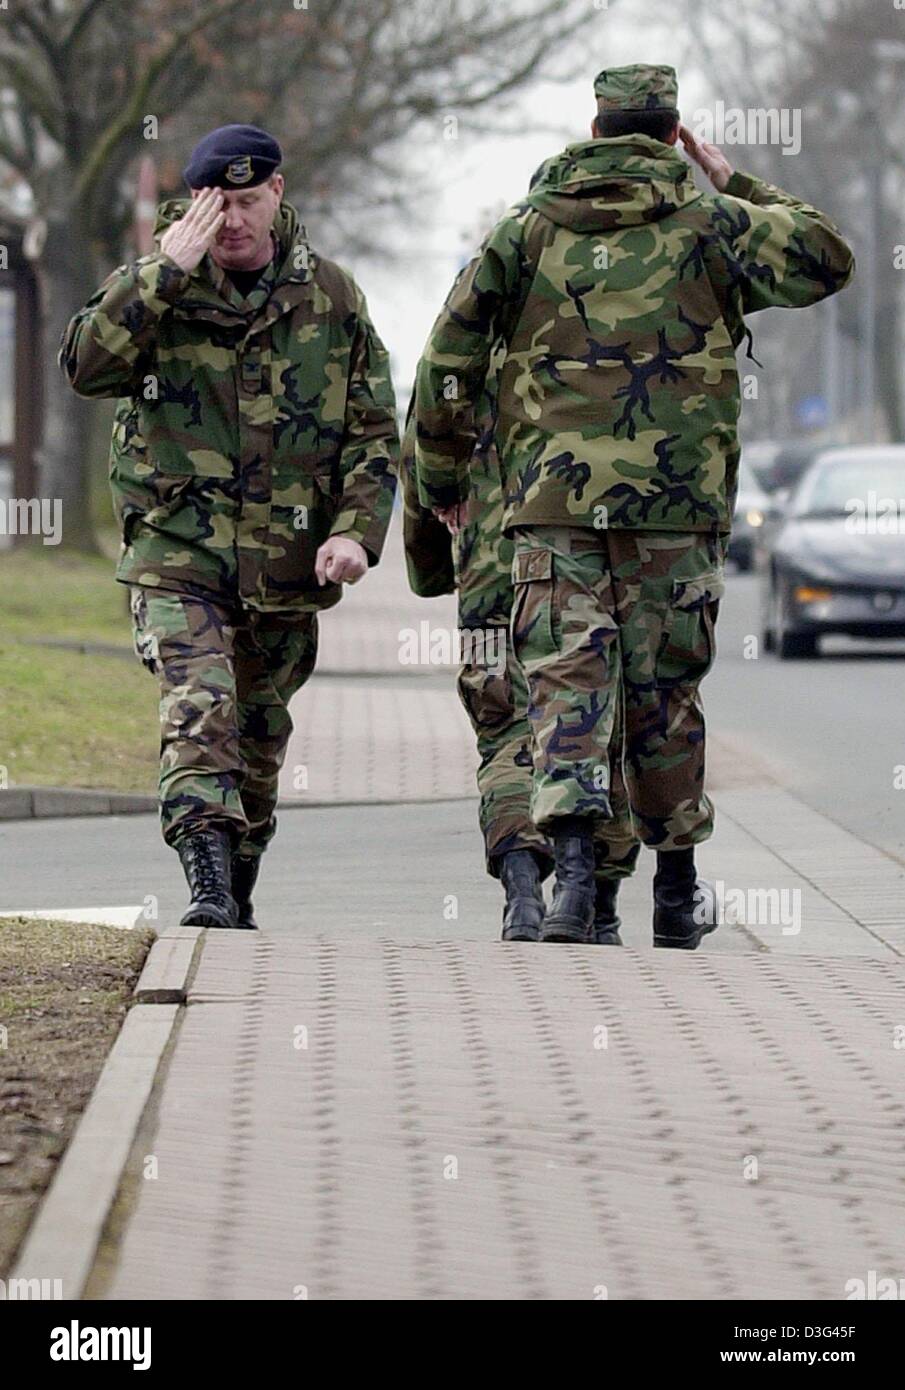 (dpa) - Soldiers greet as they walk past each other on the US airbase Ramstein near Landstuhl, western Germany, 10 February 2003. Ramstein is the biggest base of the US air force outside the United States. It is the home of the 86th airlift wing (transportation squadron) and the headquarter of the US Air Forces Europe. According to the newspaper 'Welt am Sonntag' the US defence min Stock Photo